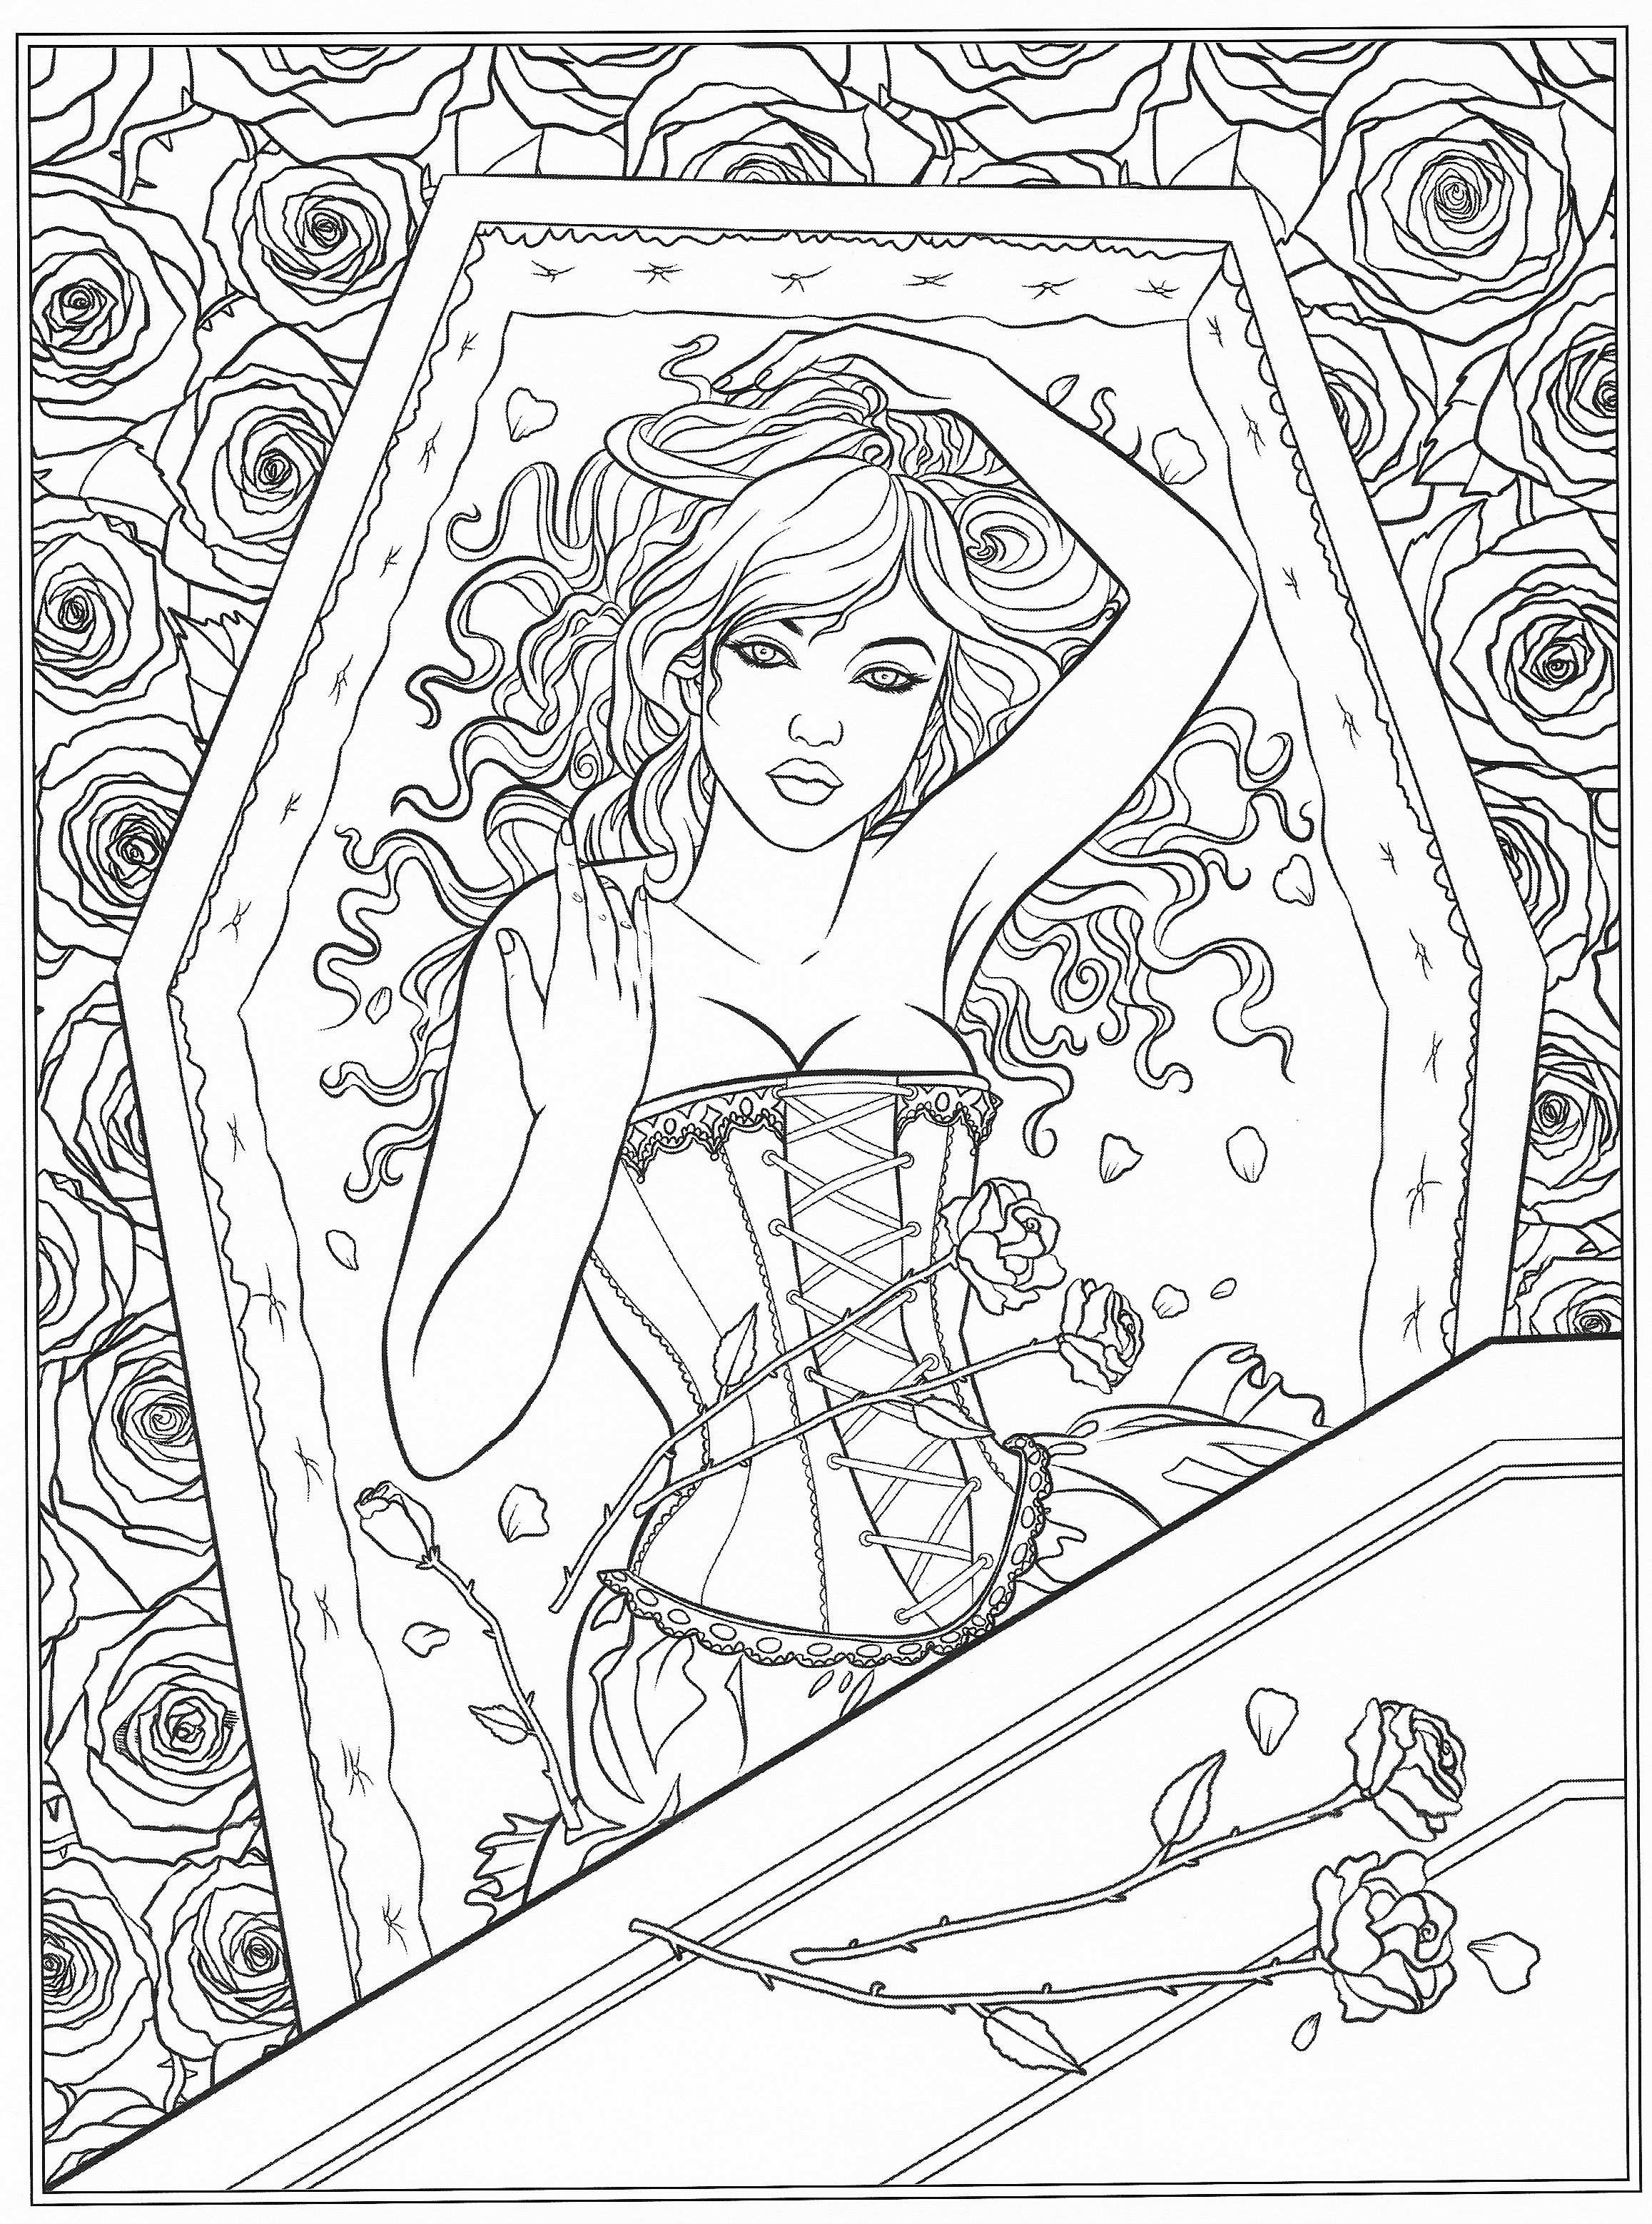 Gothic Coloring Page Fairy Coloring Pages Coloring Pages Adult